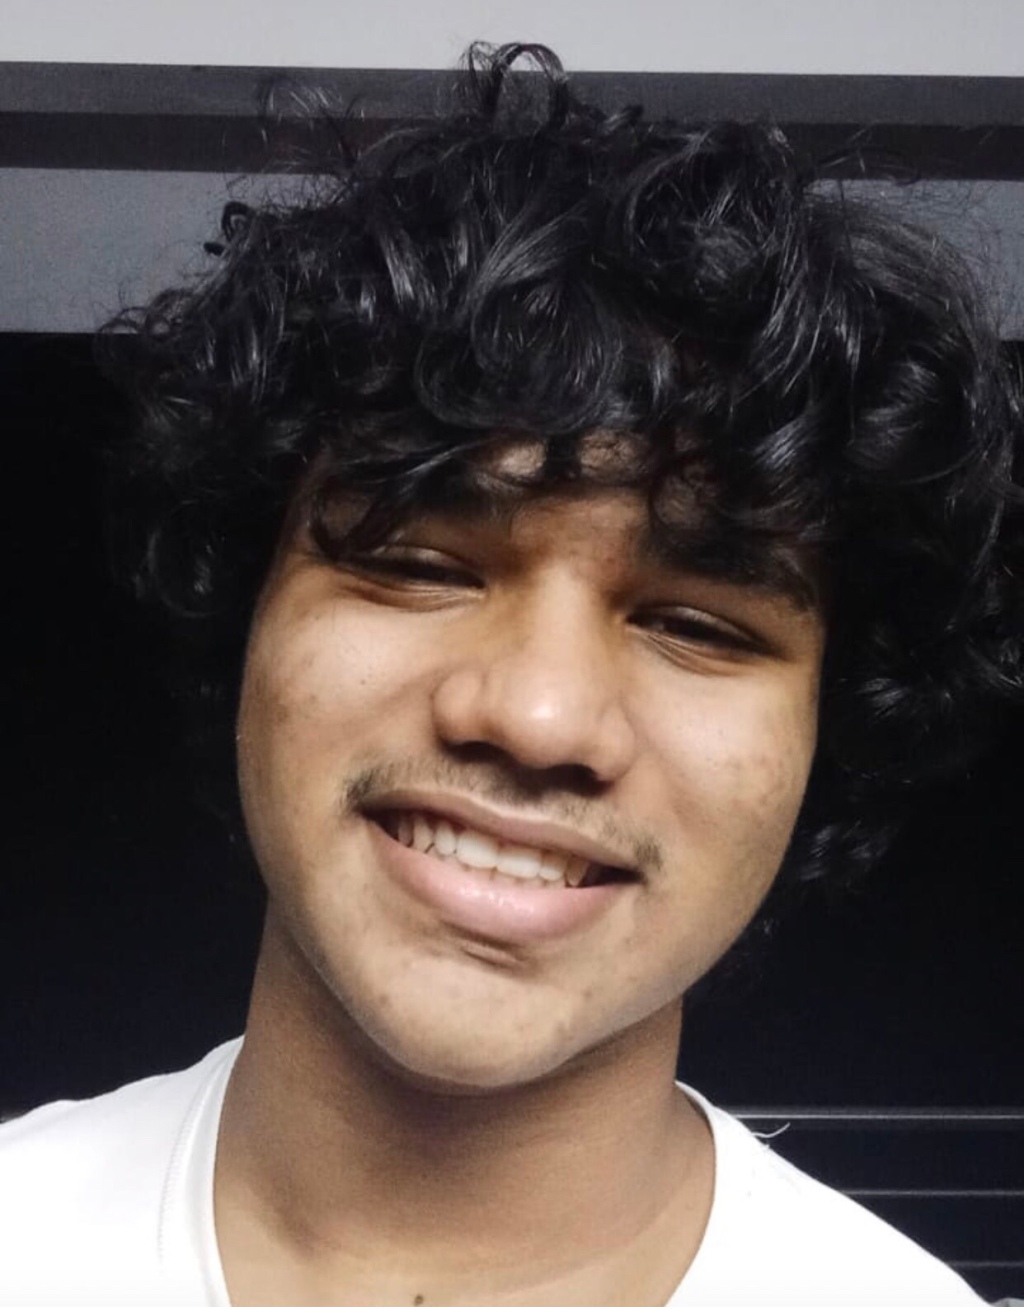 Visakh K Biju: My main goal is to just be free mentally and financially.